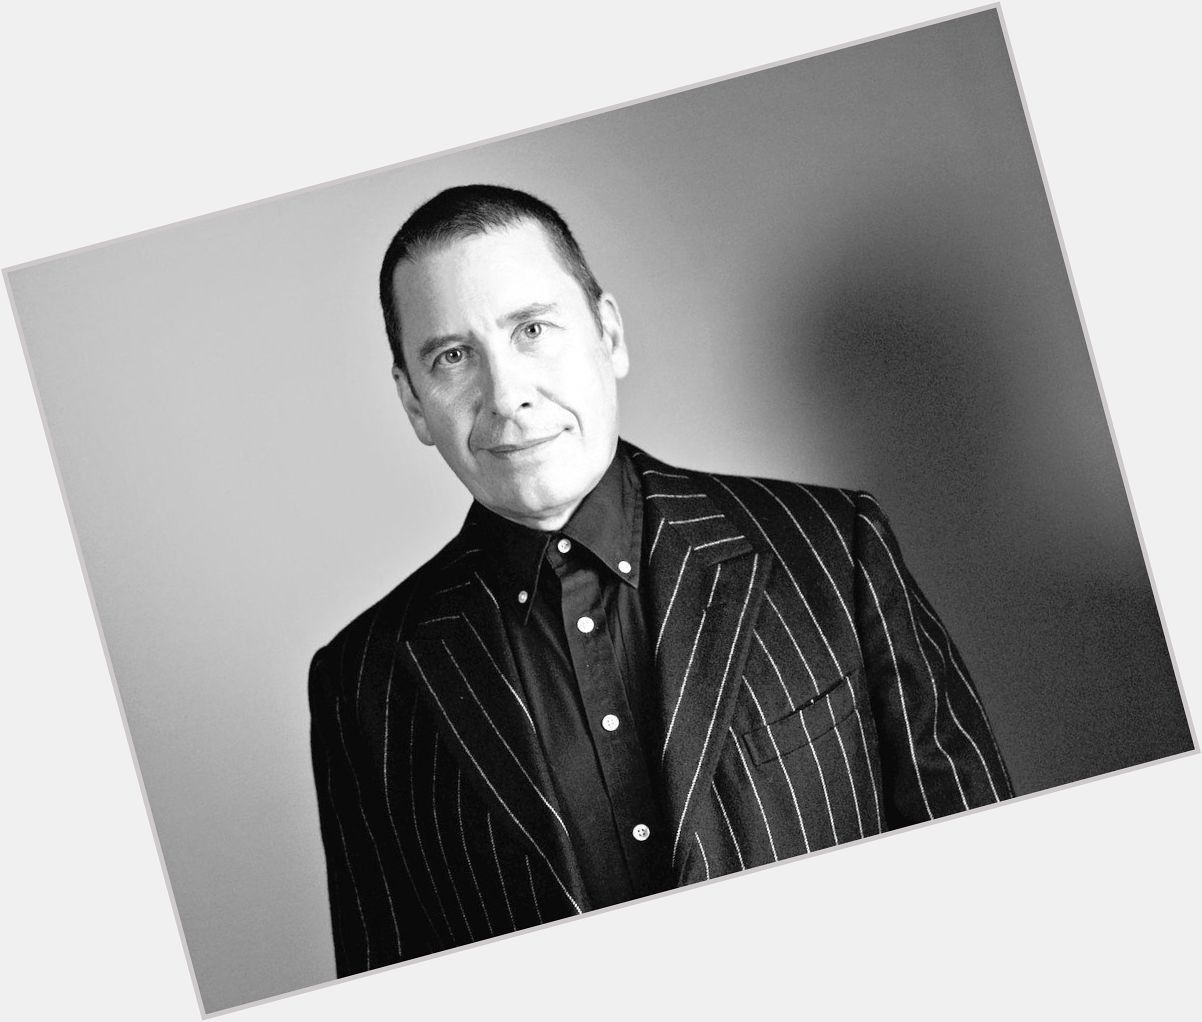 Happy Birthday to this guy: The piano legend that is Jools Holland turns 60 today. 